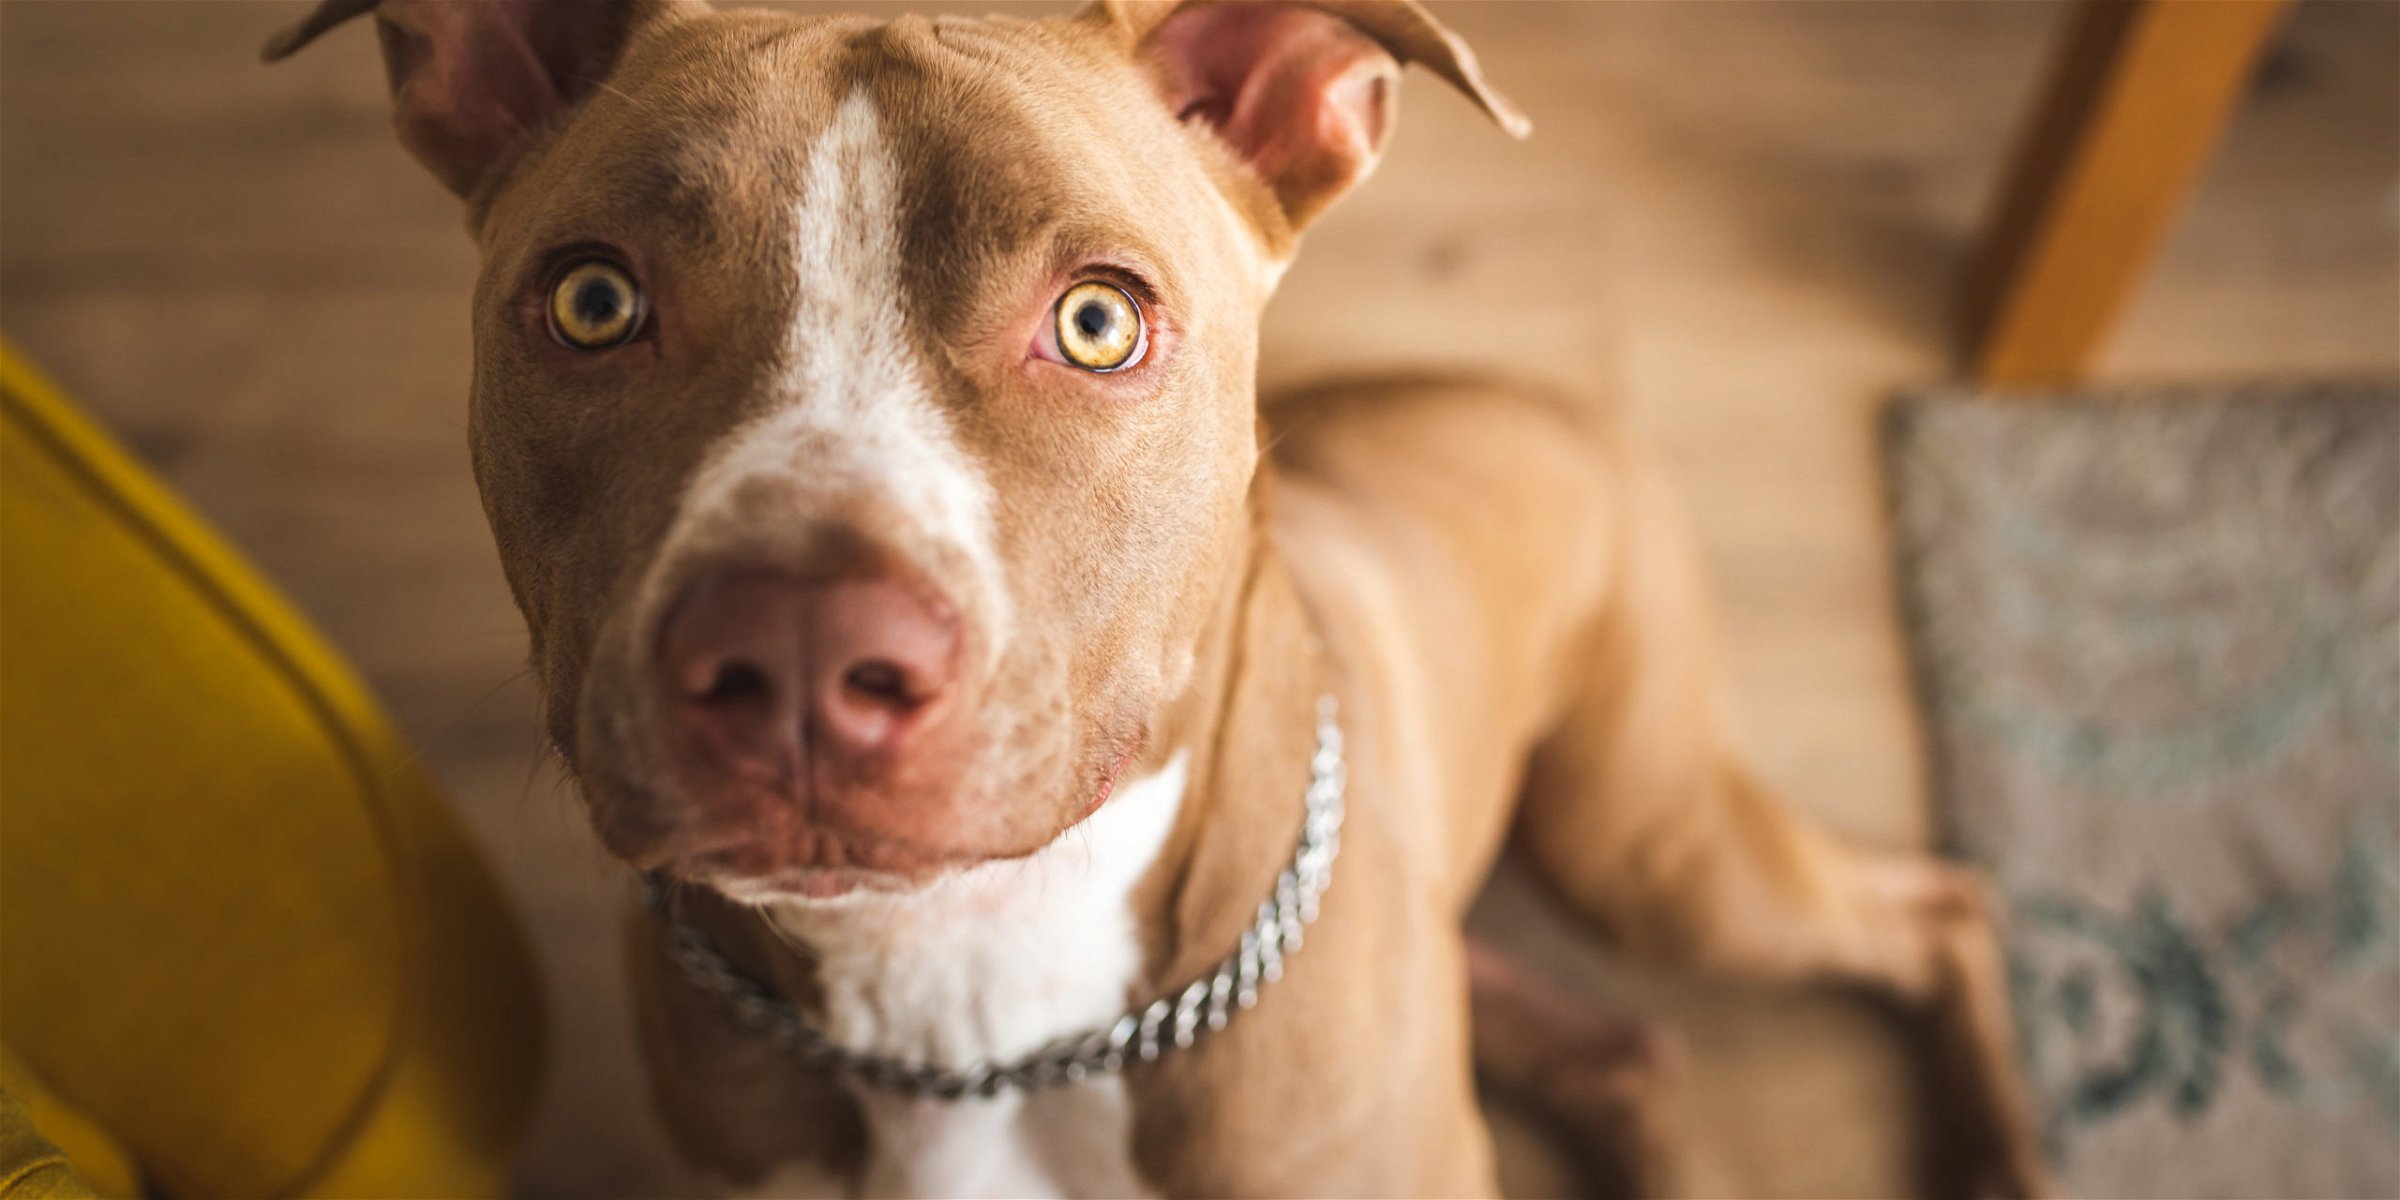 Dog bites in apartment building complexes can be tricky cases due to breed and size restrictions that may limit insurance liability. Call our South Carolina dog bite attorneys if you were severely injured.